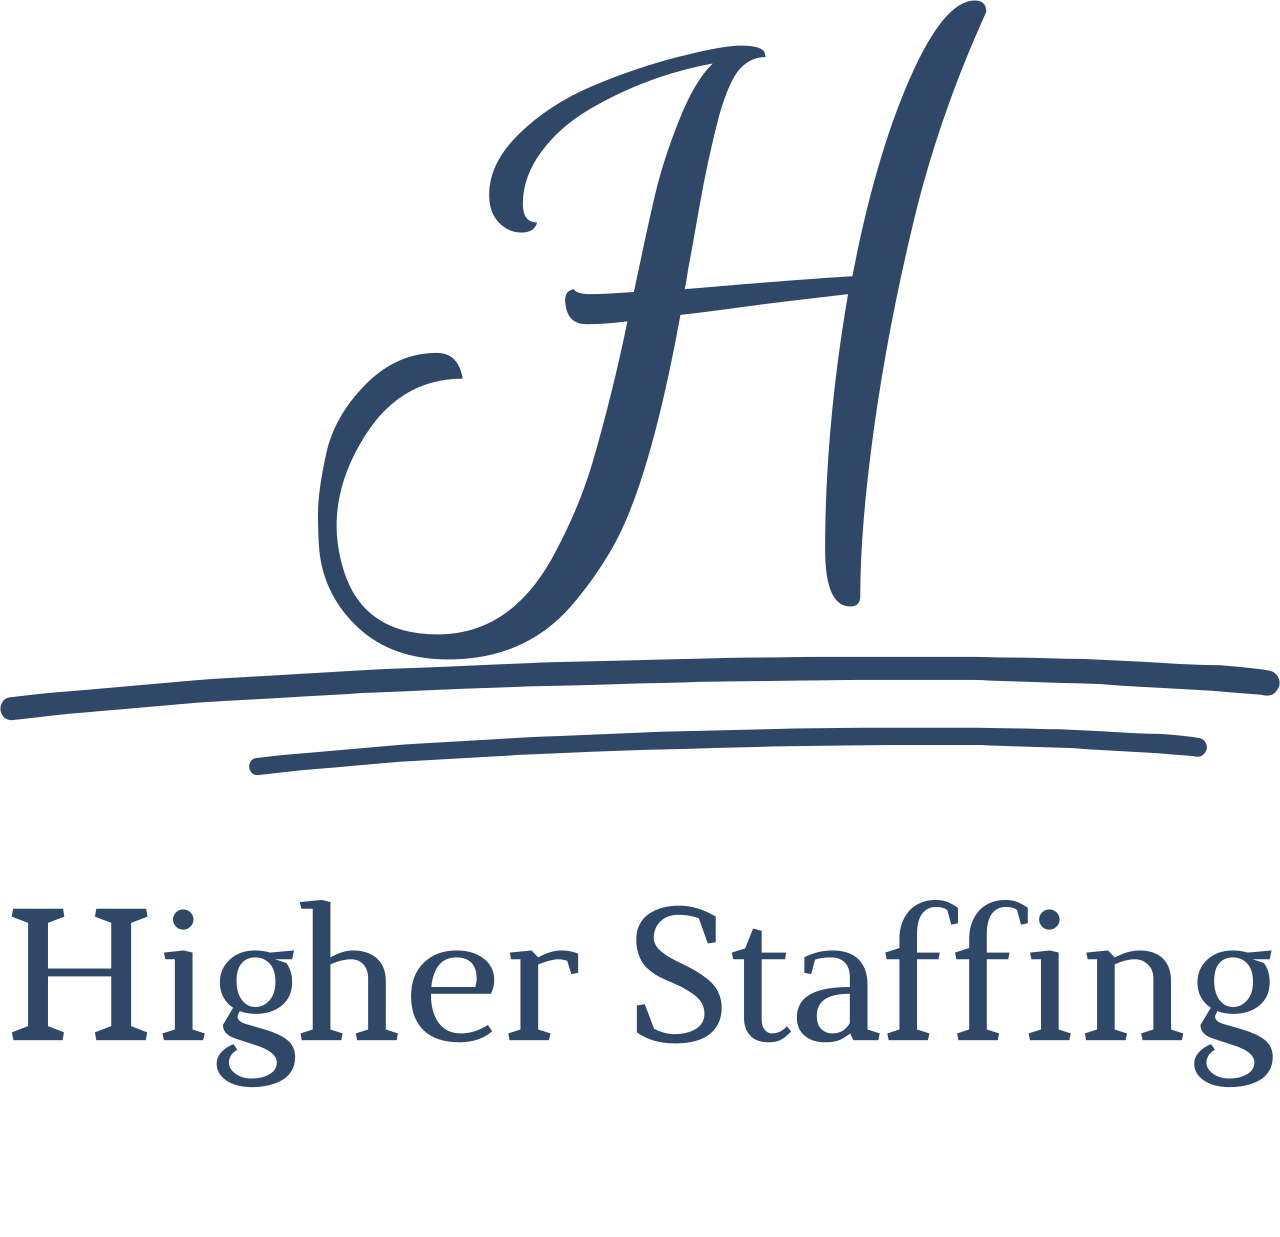 Higher Staffing's web page